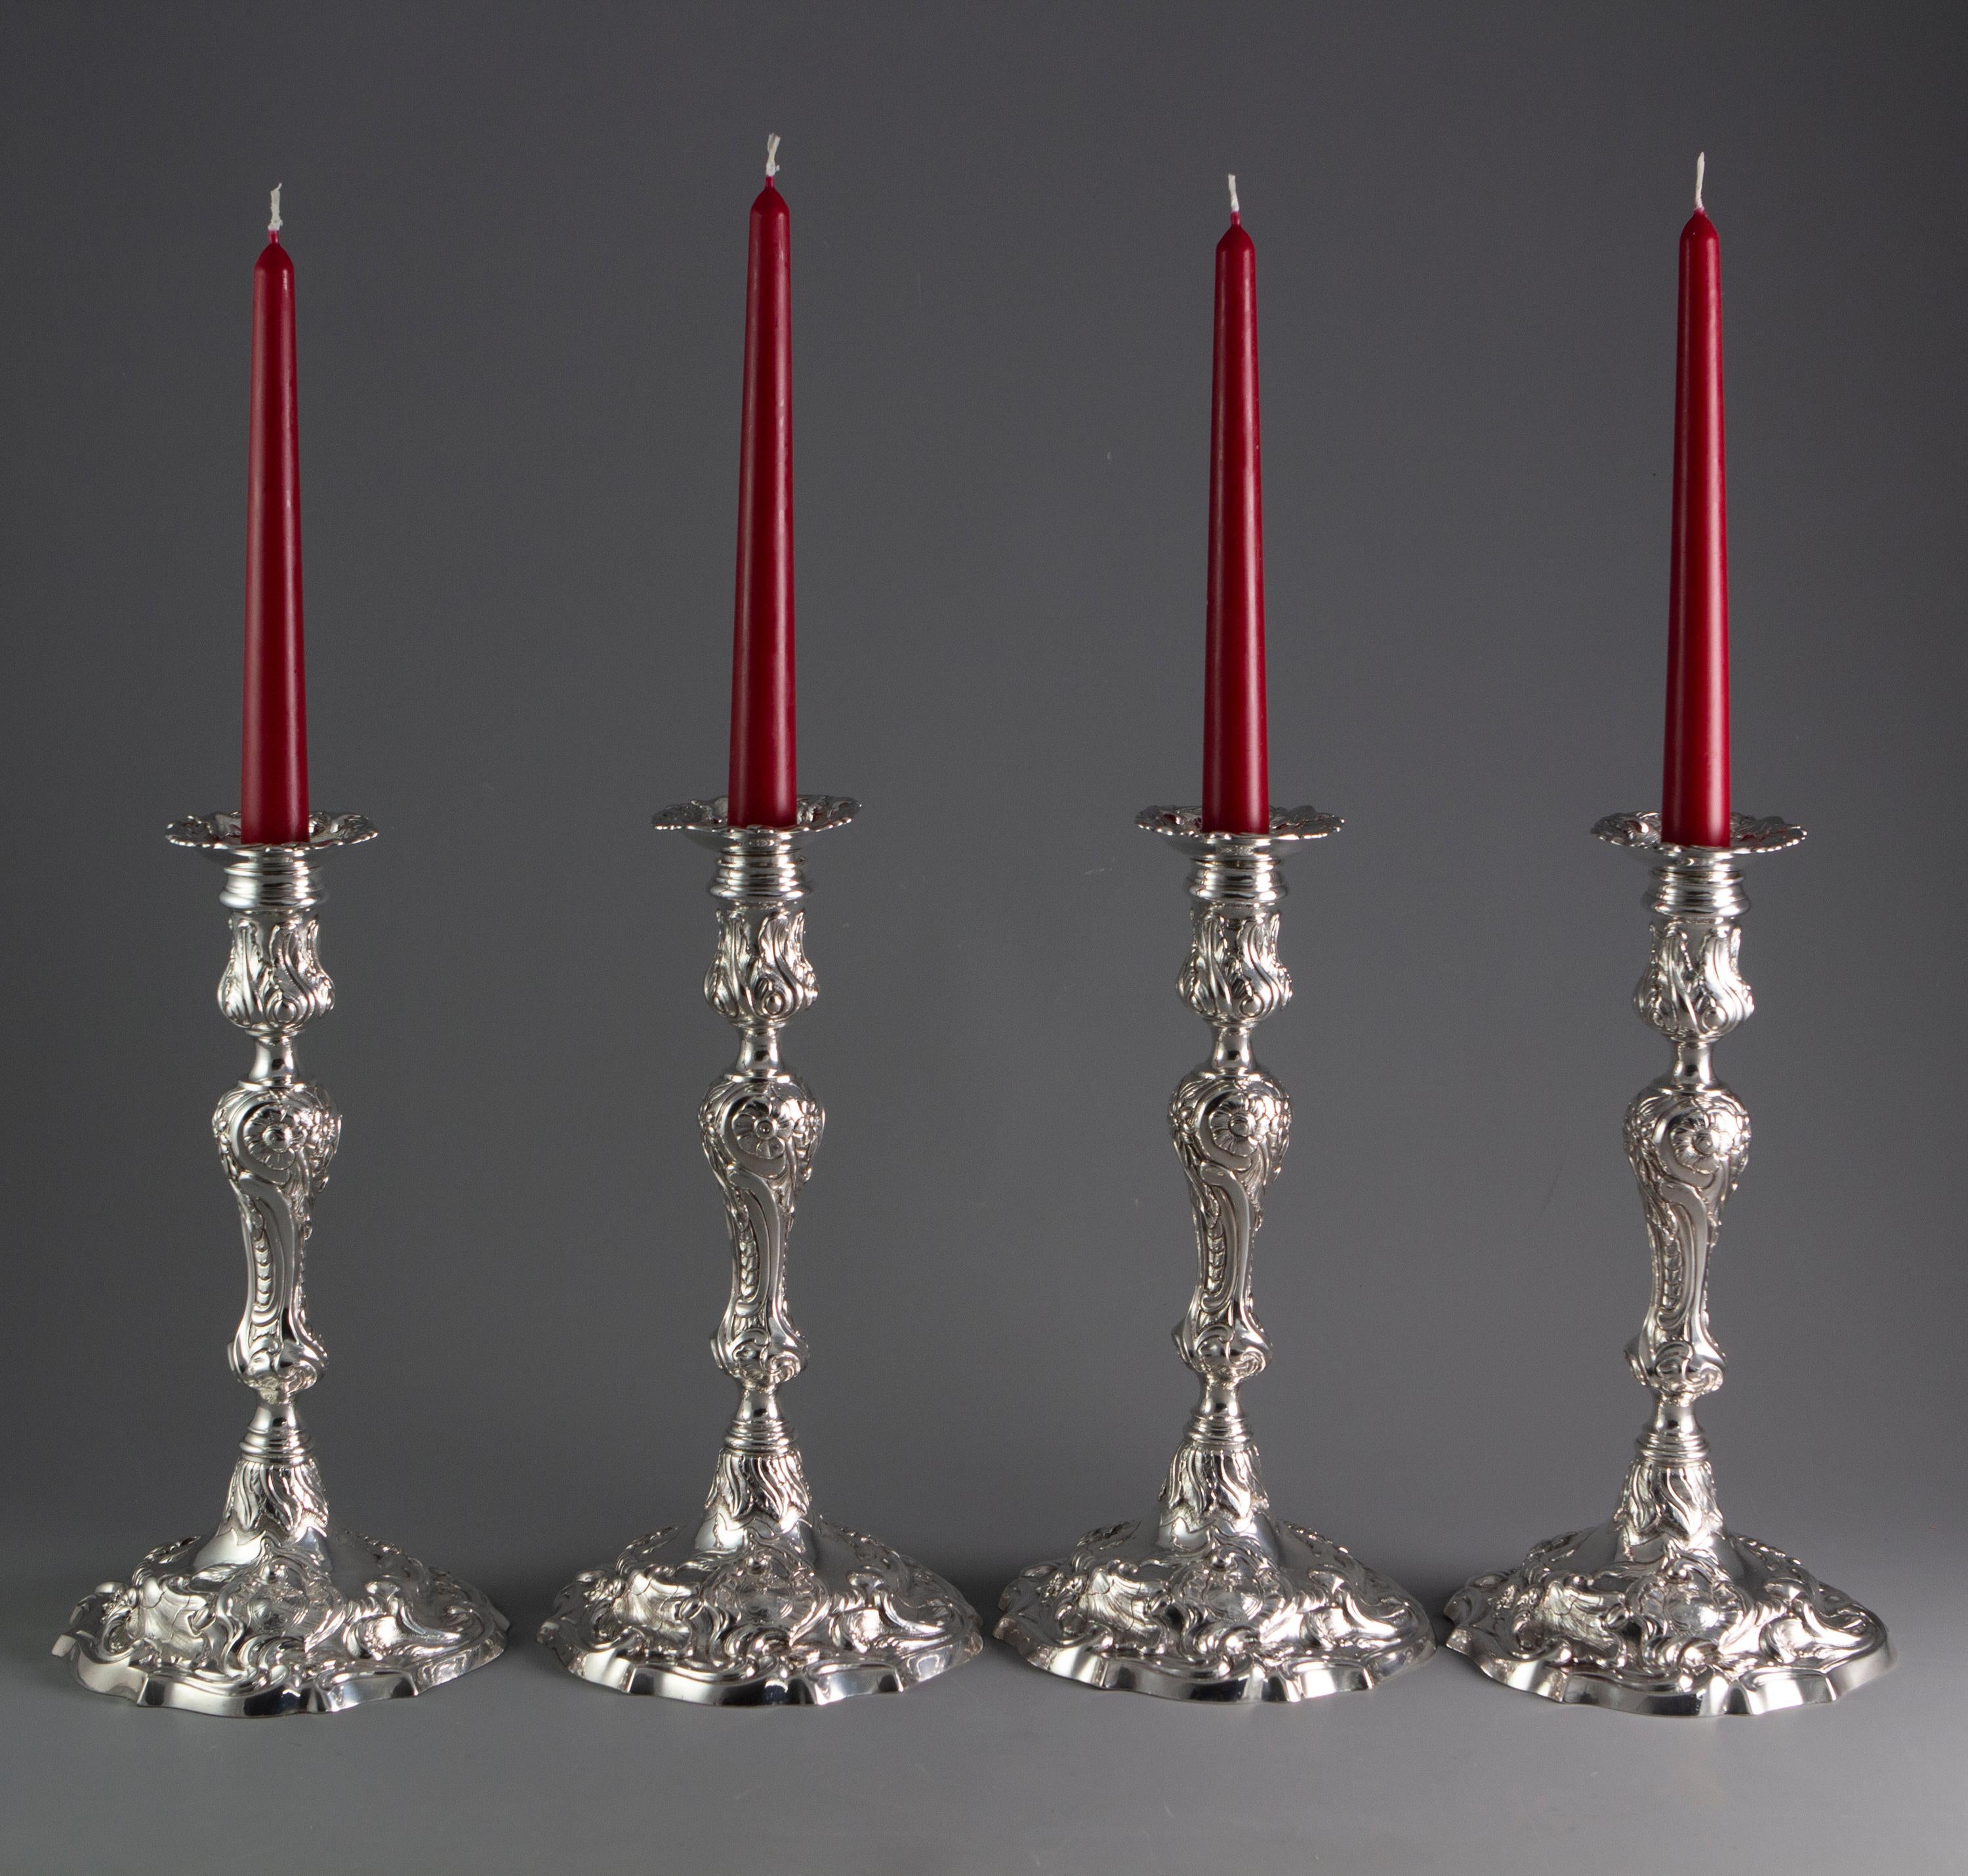 George III A Set of 4 George II Cast Silver Candlesticks, London 1753 by John Cafe